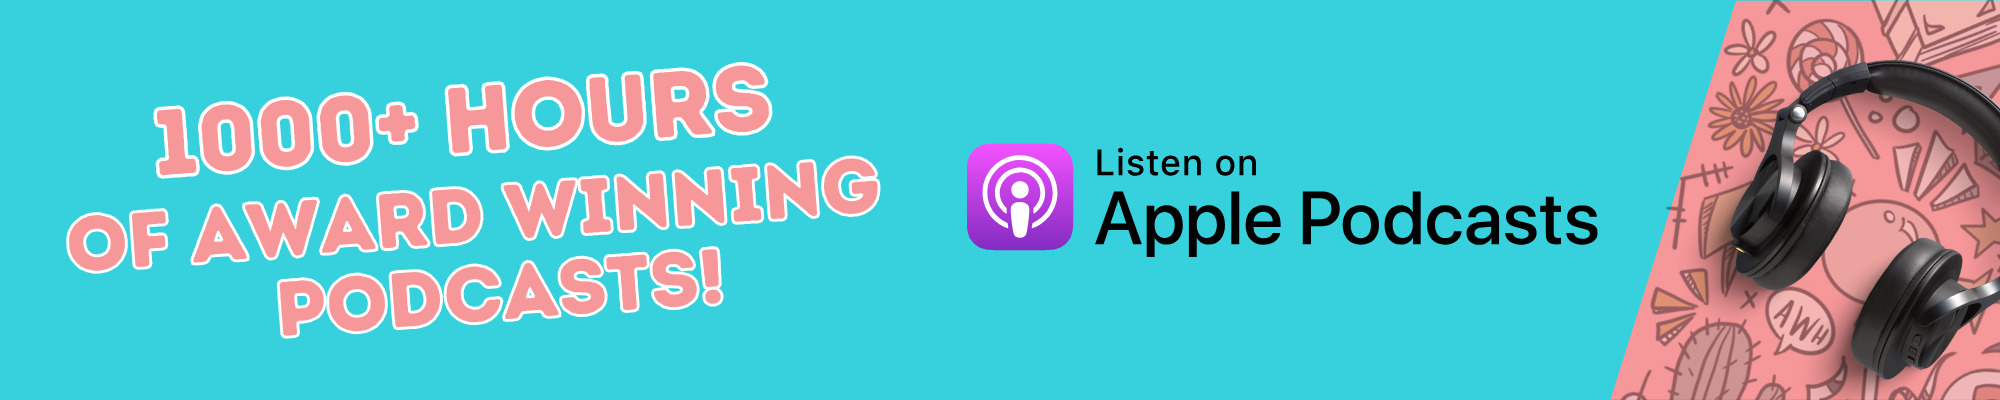 Listen to new episodes of The Brain Candy Podcast on Apple Podcasts. Two new episodes every week.